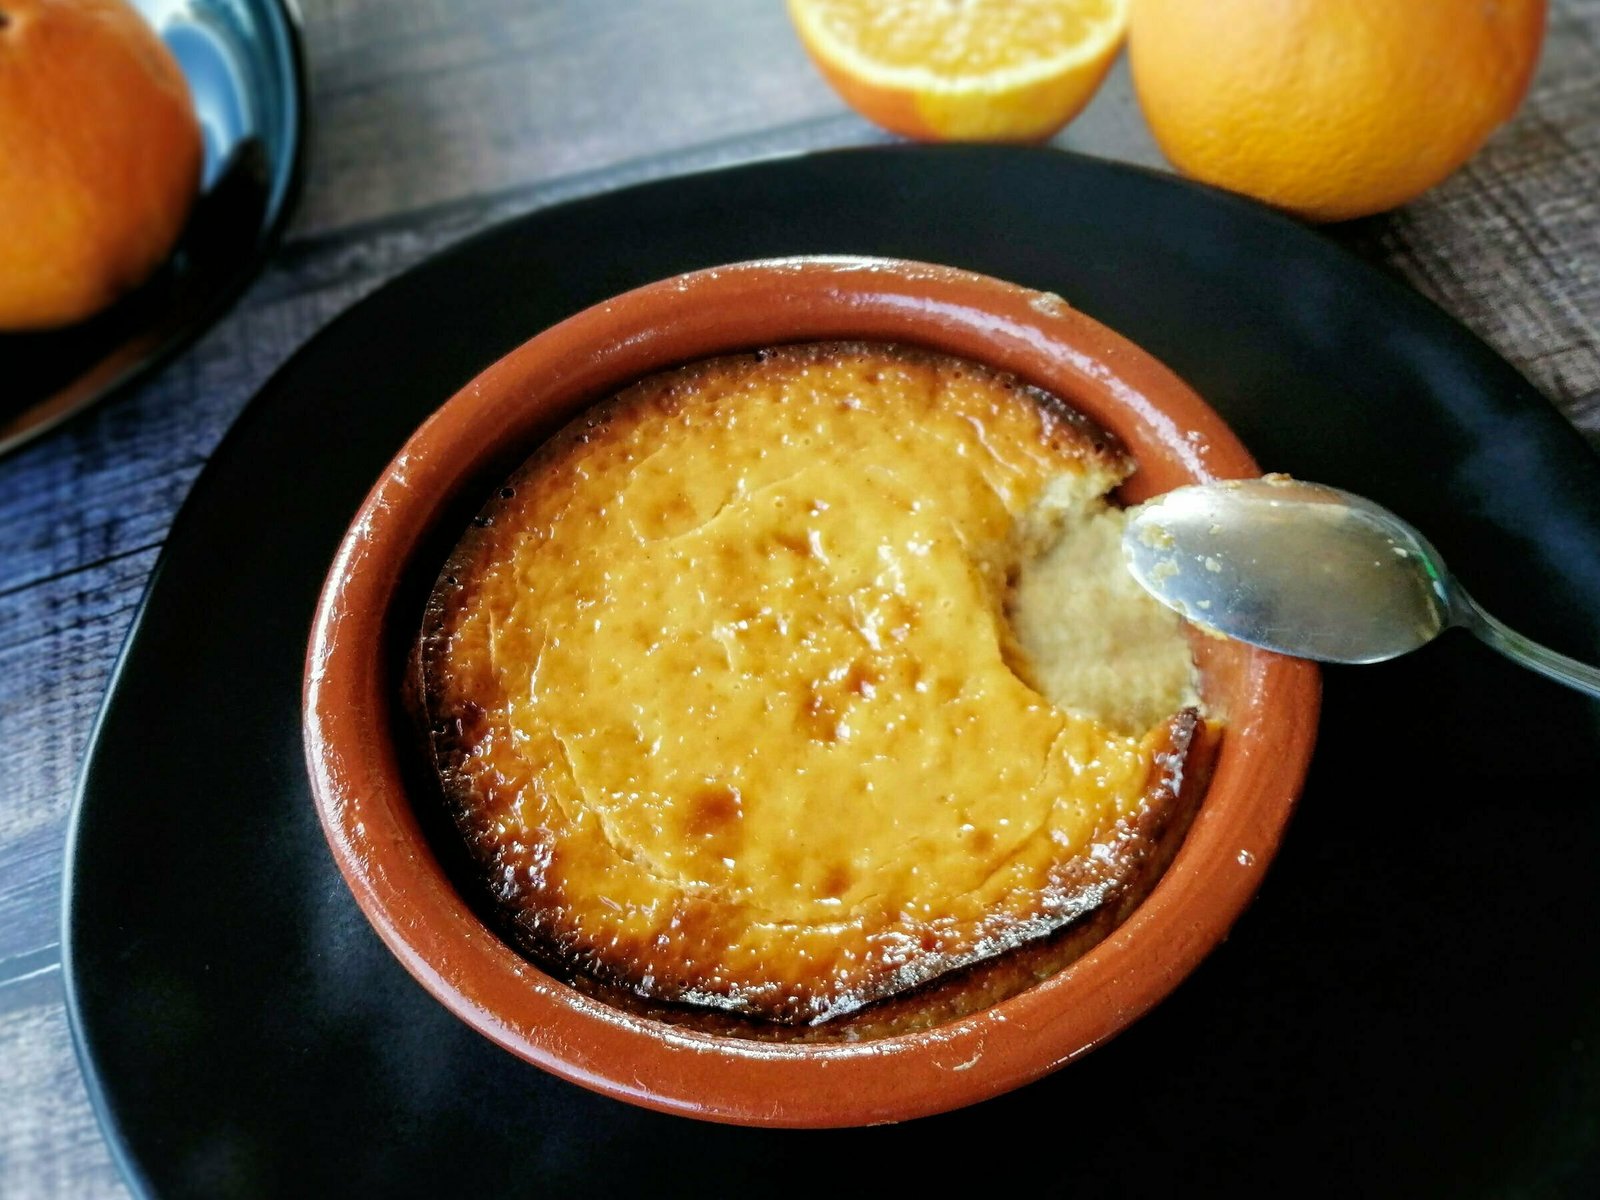 A baked cheesecake with hoey and orange sits on a wooden counter